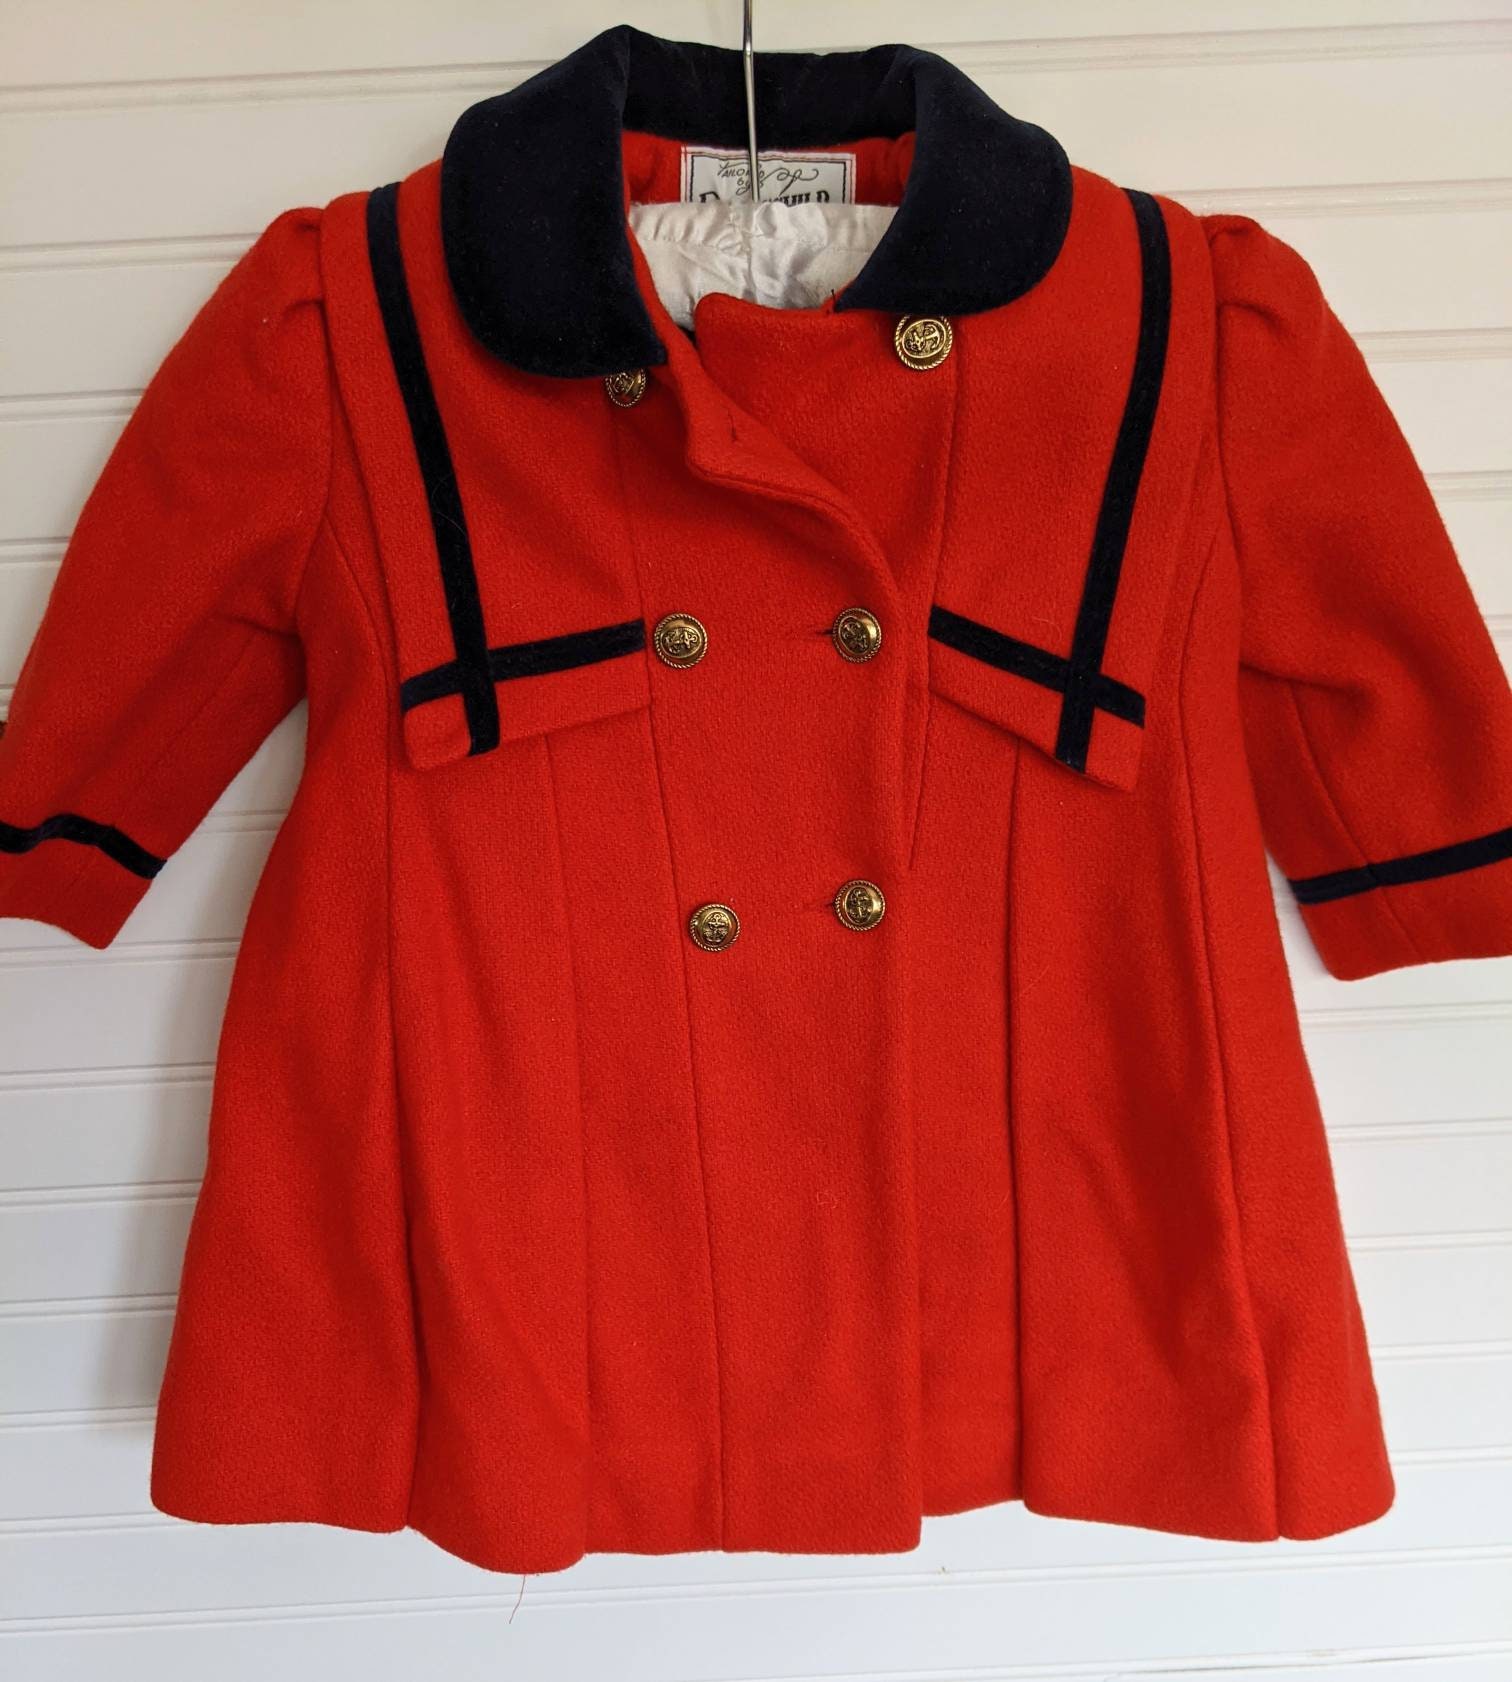 Tailored By ROTHSCHILD Girl's Coat Red Wool Size 2T | Etsy